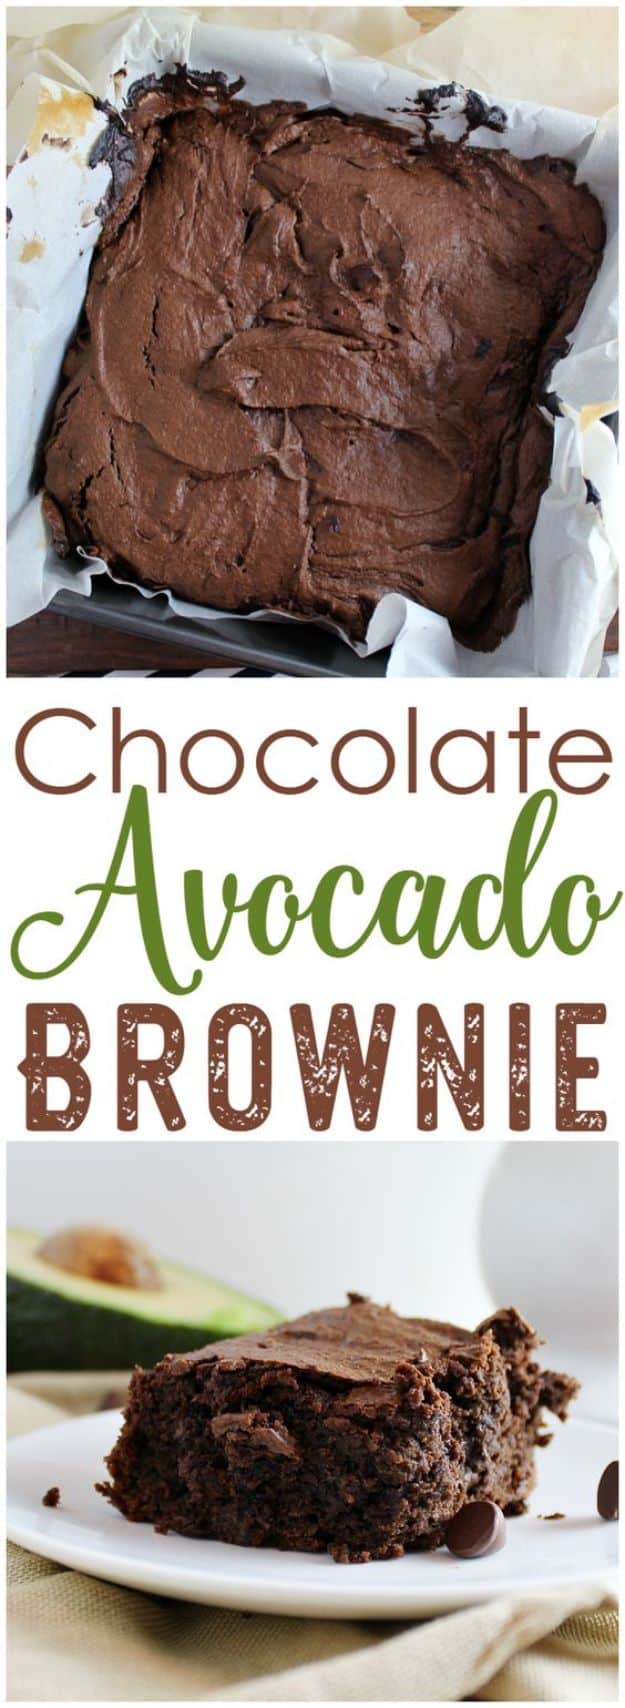 Avocado Recipes - Chocolate Avocado Brownies - Quick Avocado Toast, Eggs, Keto Guacamole, Dips, Salads, Healthy Lunches, Breakfast, Dessert and Dinners - Party Foods, Soups, Low Carb Salad Dressings and Smoothie #avocado #recipes